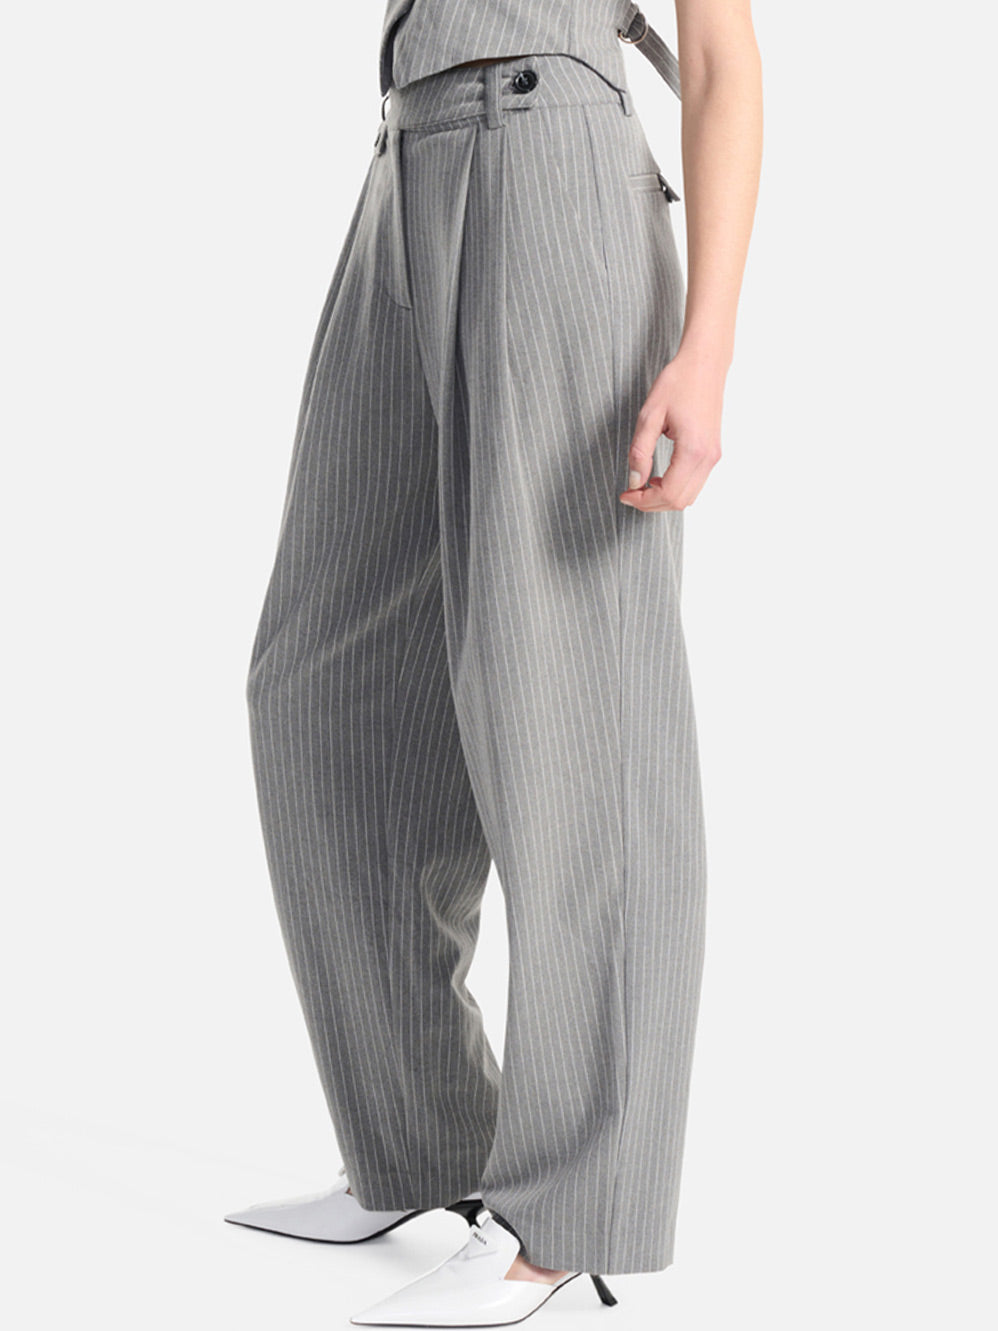 ENA PELY SERENA TAILORED PANT